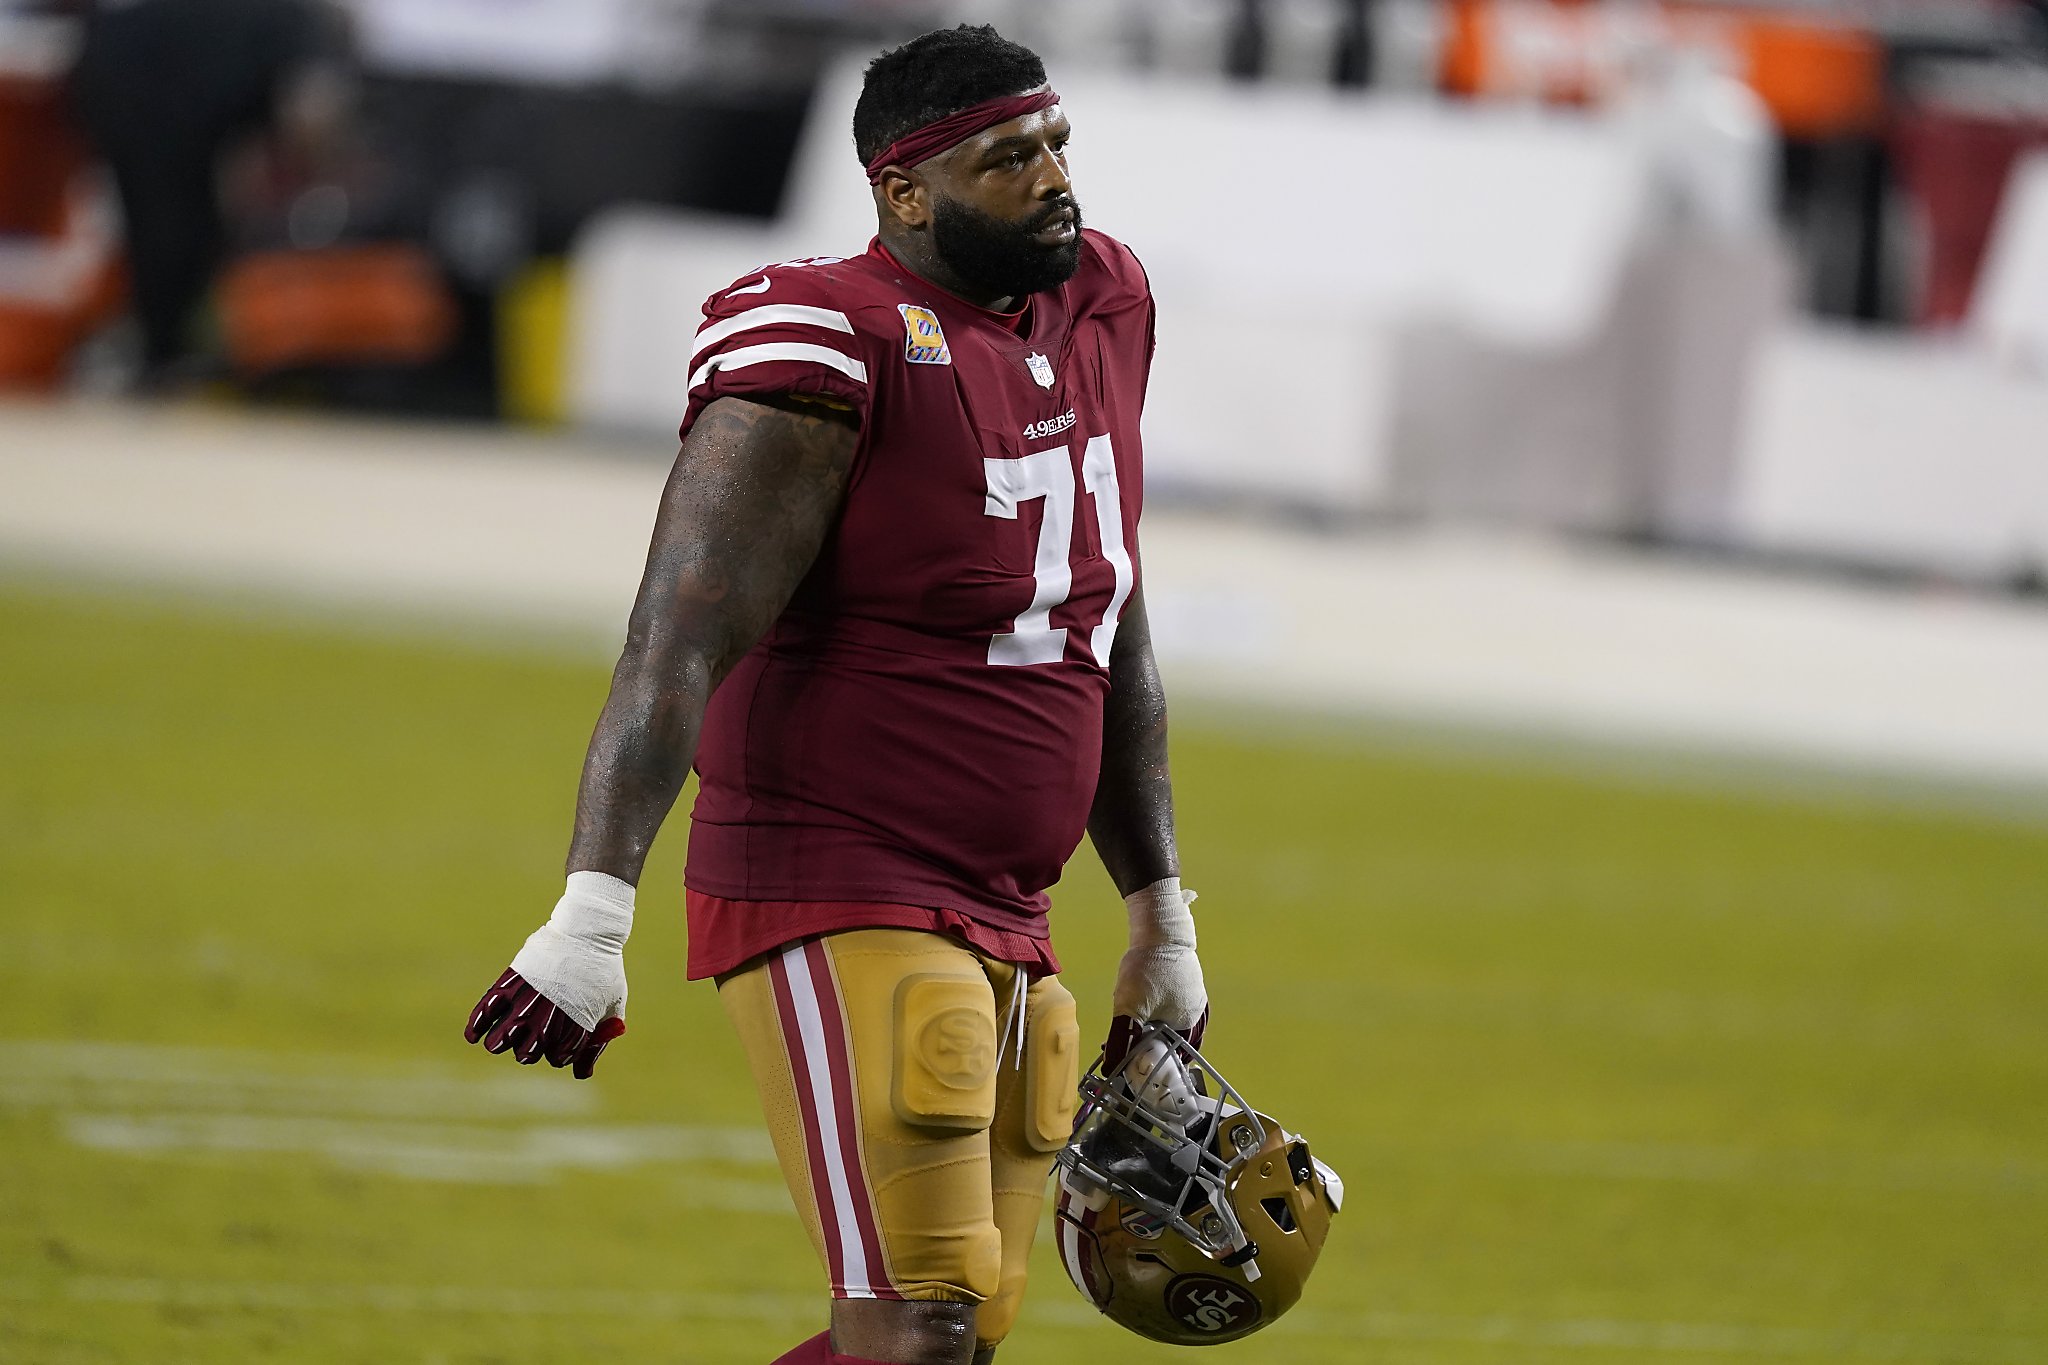 49ers do not hire Trent Williams as reserve defender options dwindle